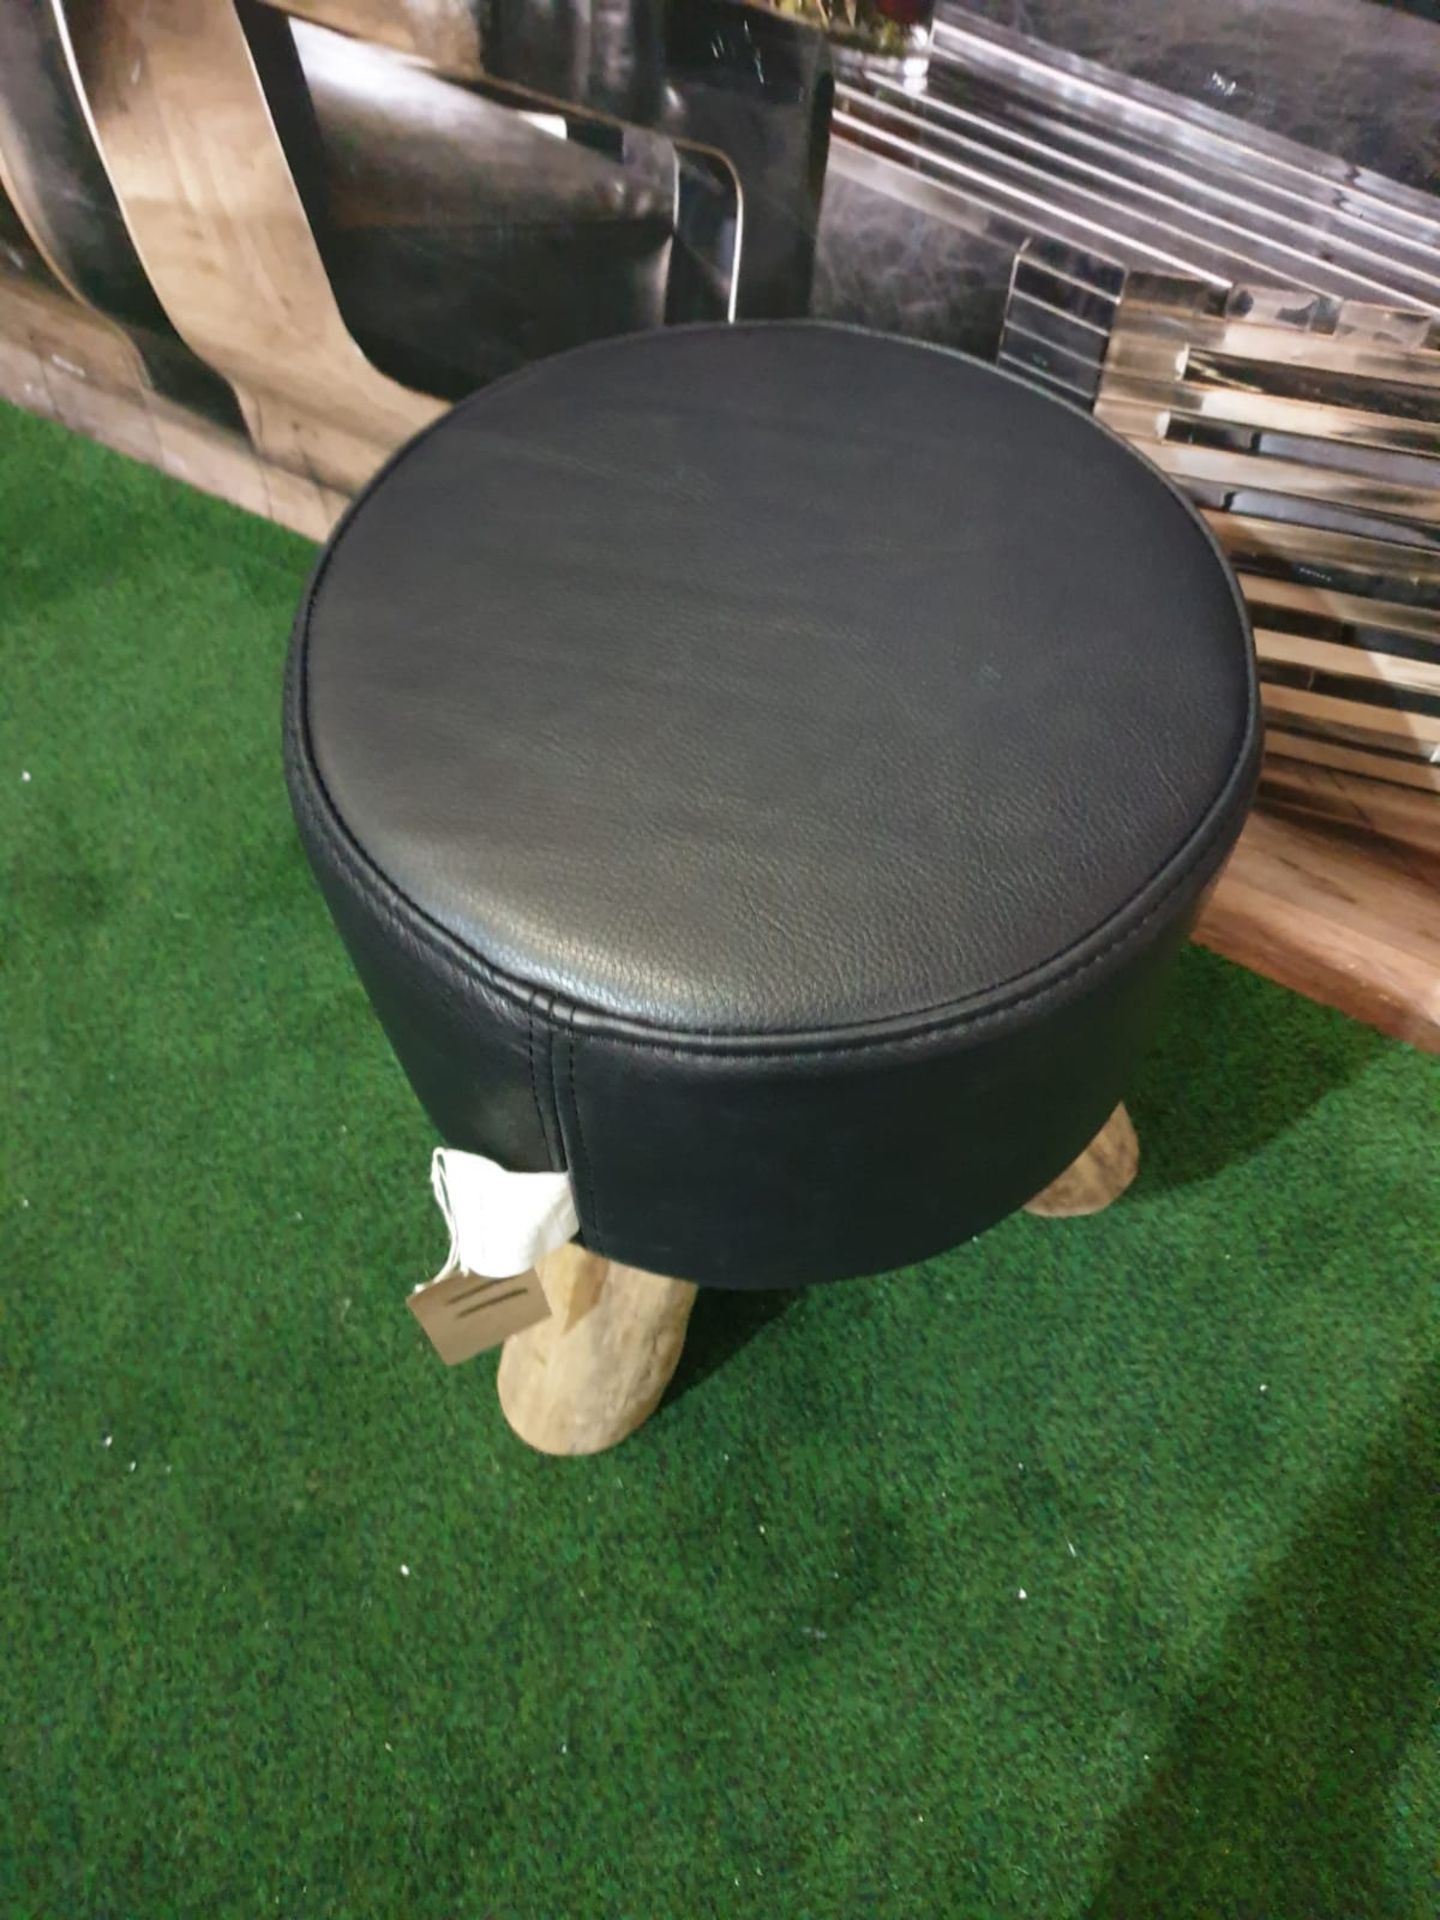 Bleu Nature F016 Mousse Driftwood and leather stool finished in Noir Black hide leather 380 x 380 - Image 2 of 3